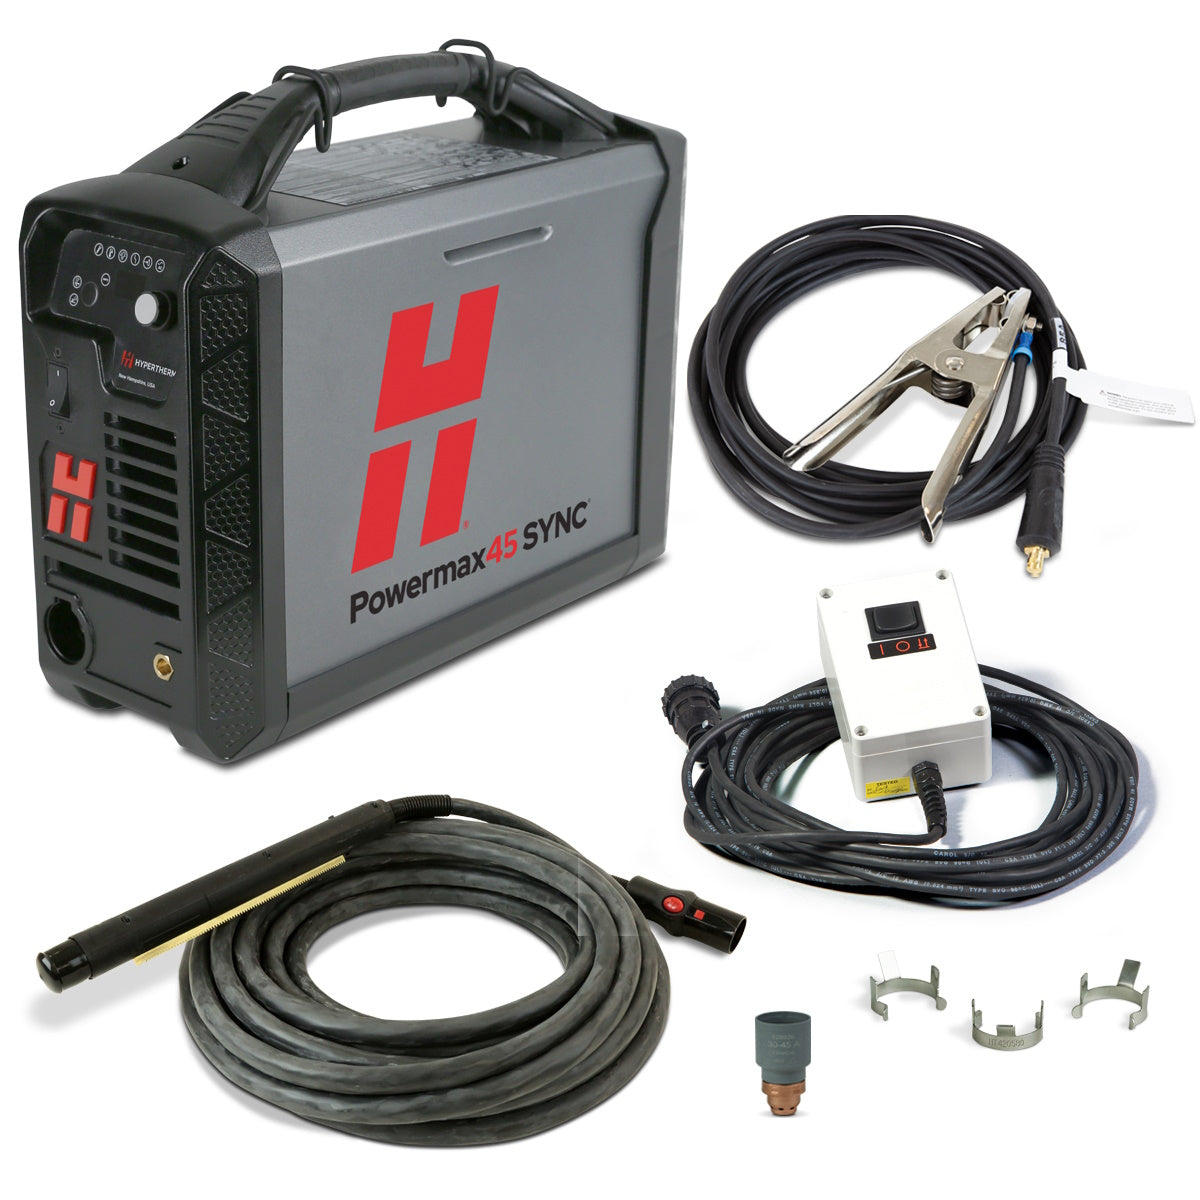 Hypertherm Powermax45 SYNC Plasma w/25ft Mechanized Torch and On/Off Pendant (088582)